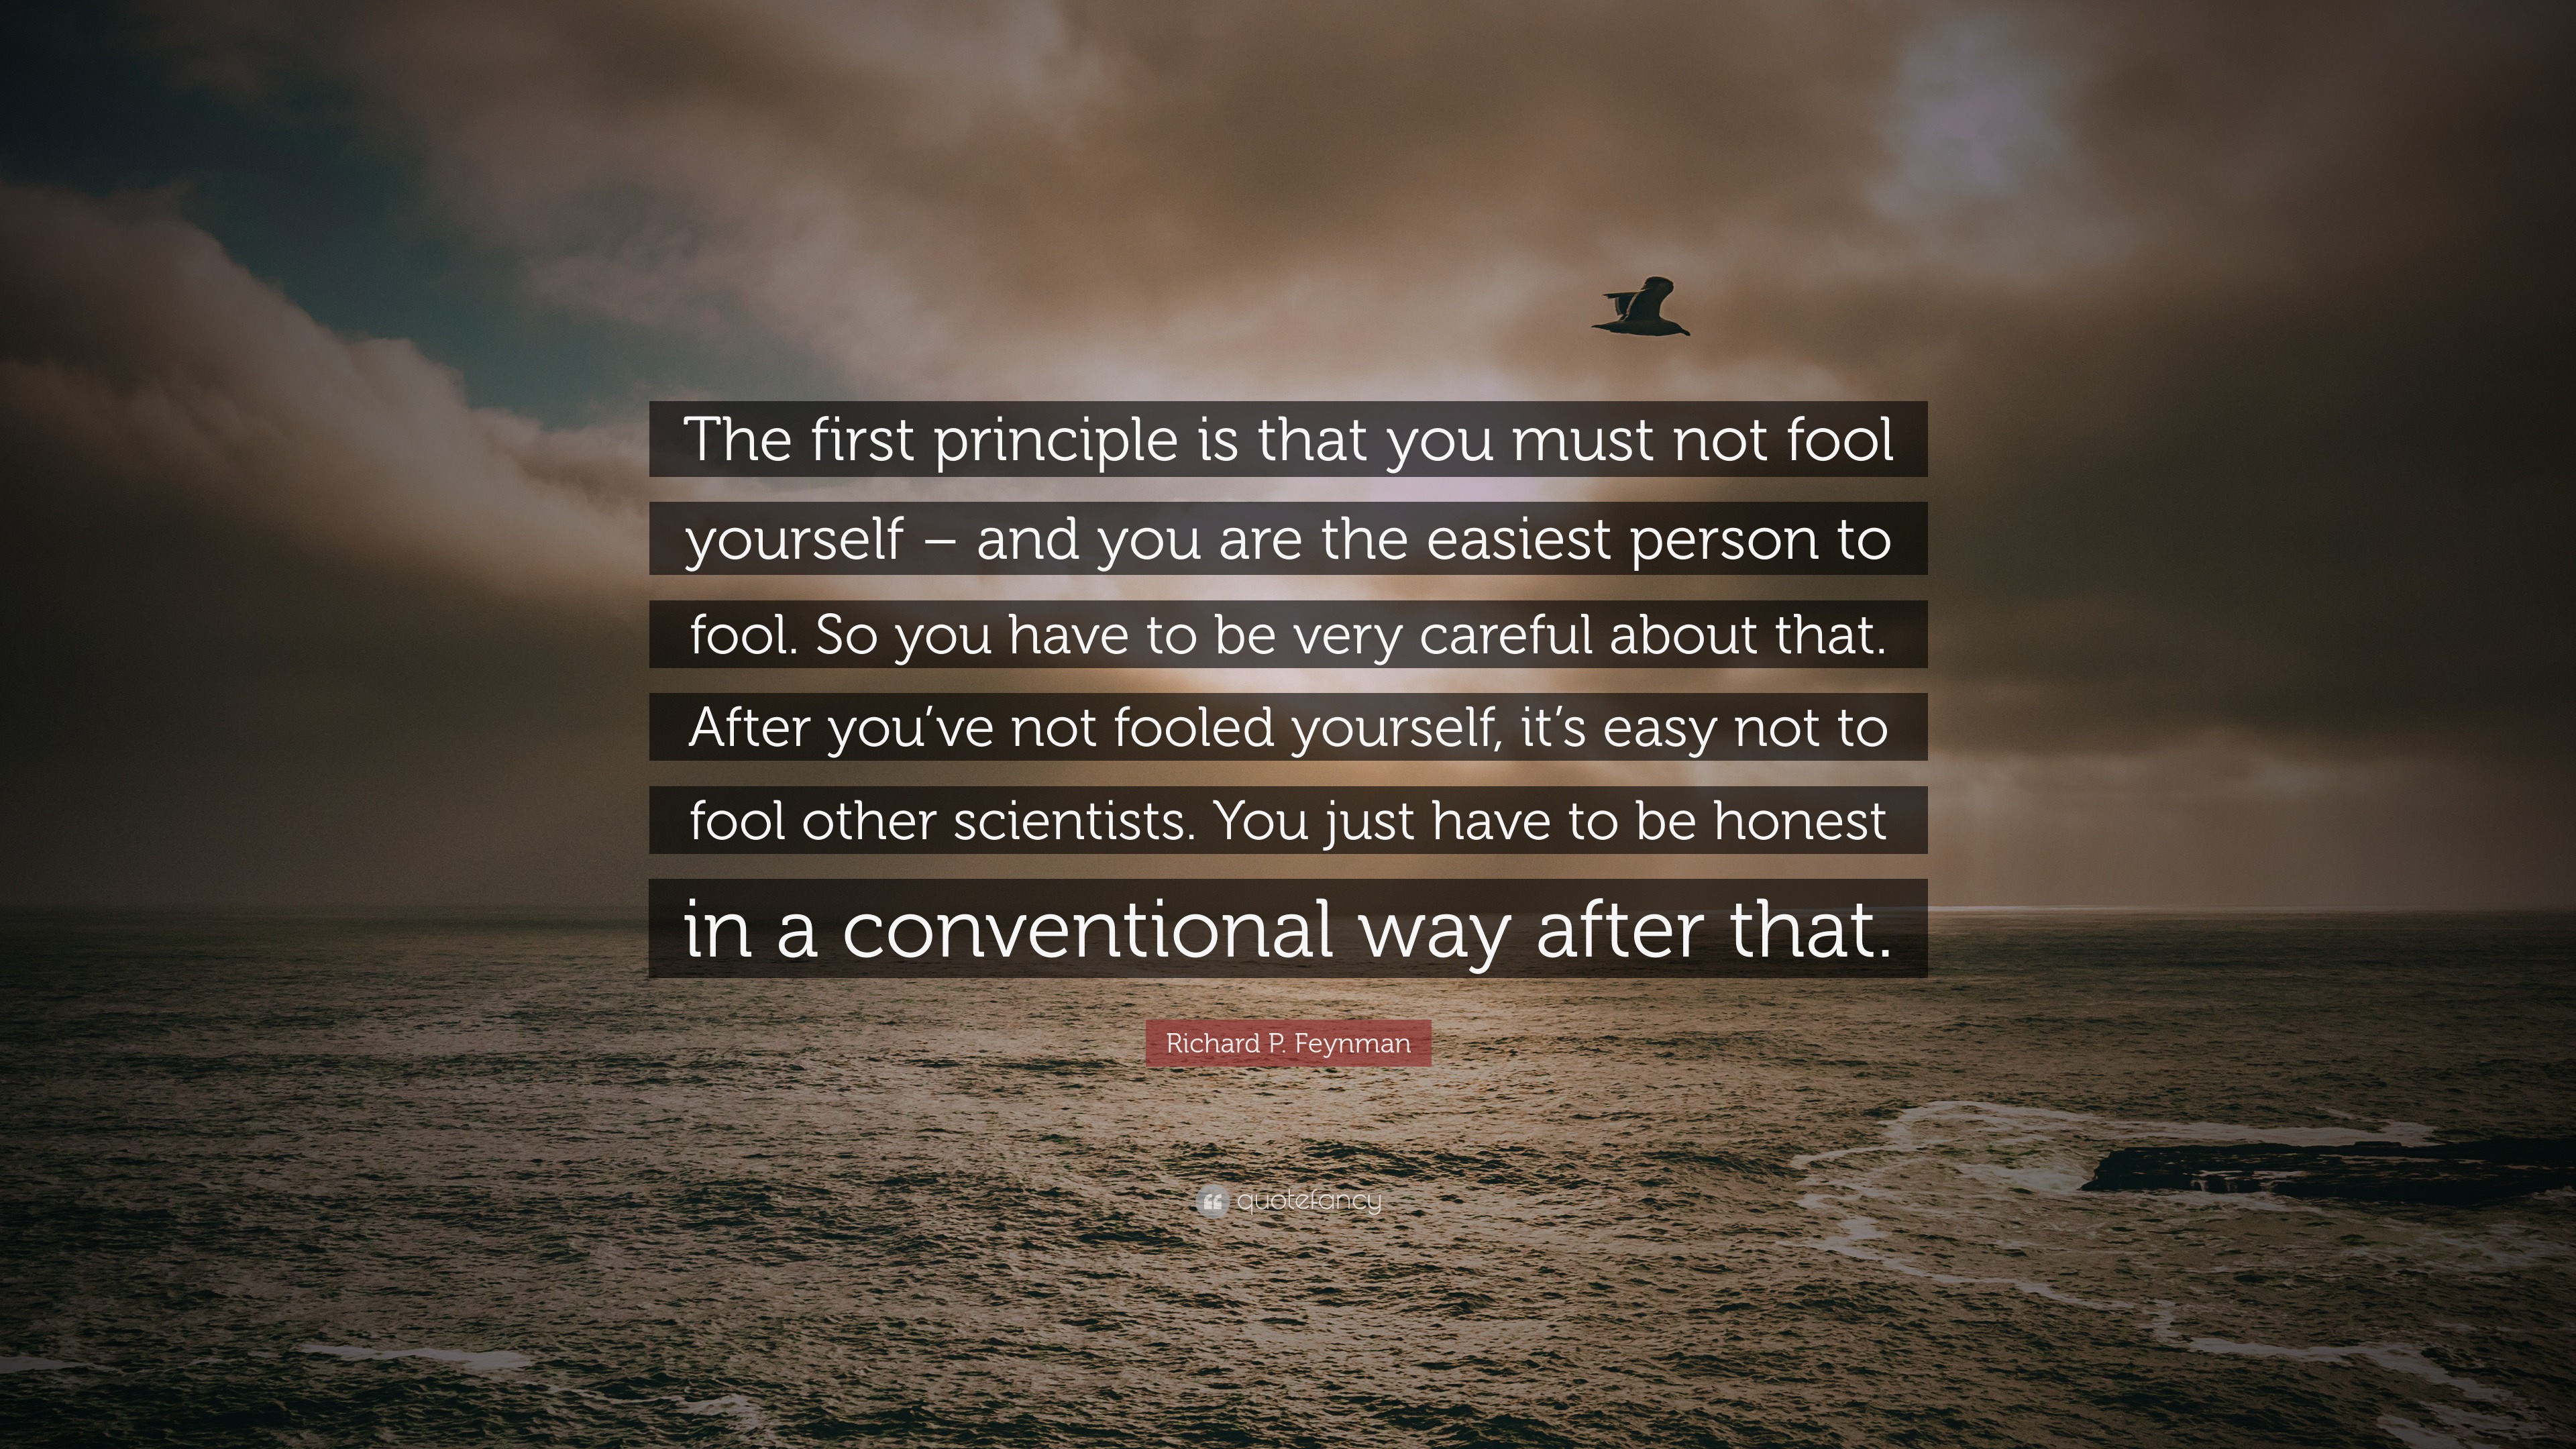 Richard P Feynman Quote The First Principle Is That You Must Not Fool Yourself And You Are The Easiest Person To Fool So You Have To Be Very